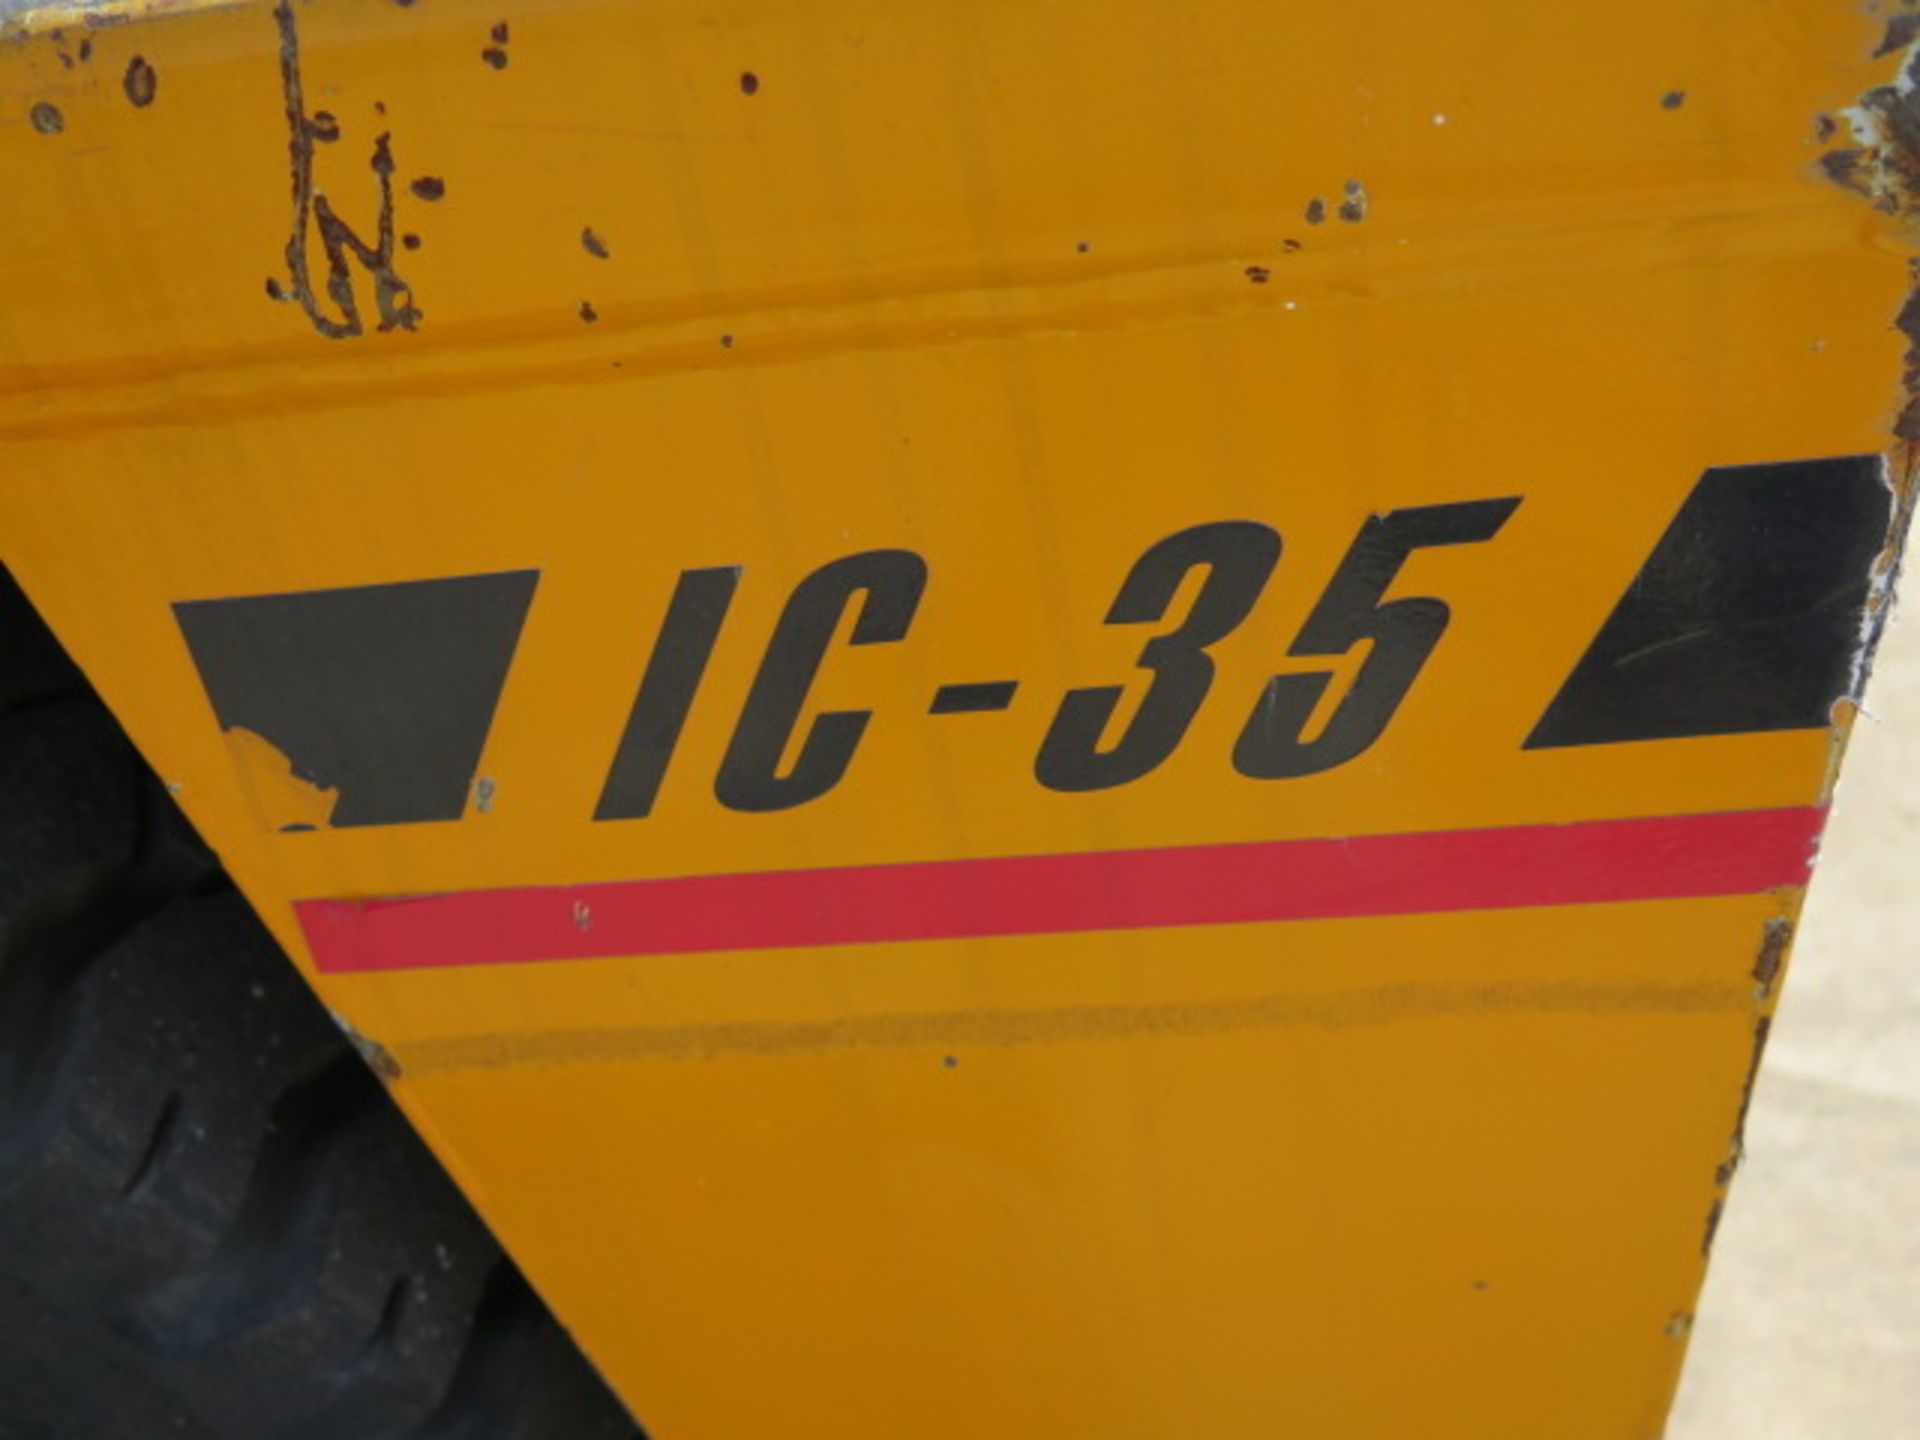 Broderson IC-35 2A 8000 Lb Cap (On Outriggers) Diesel Carry Deck Crane s/n 14822 SOLD AS IS - Image 20 of 21